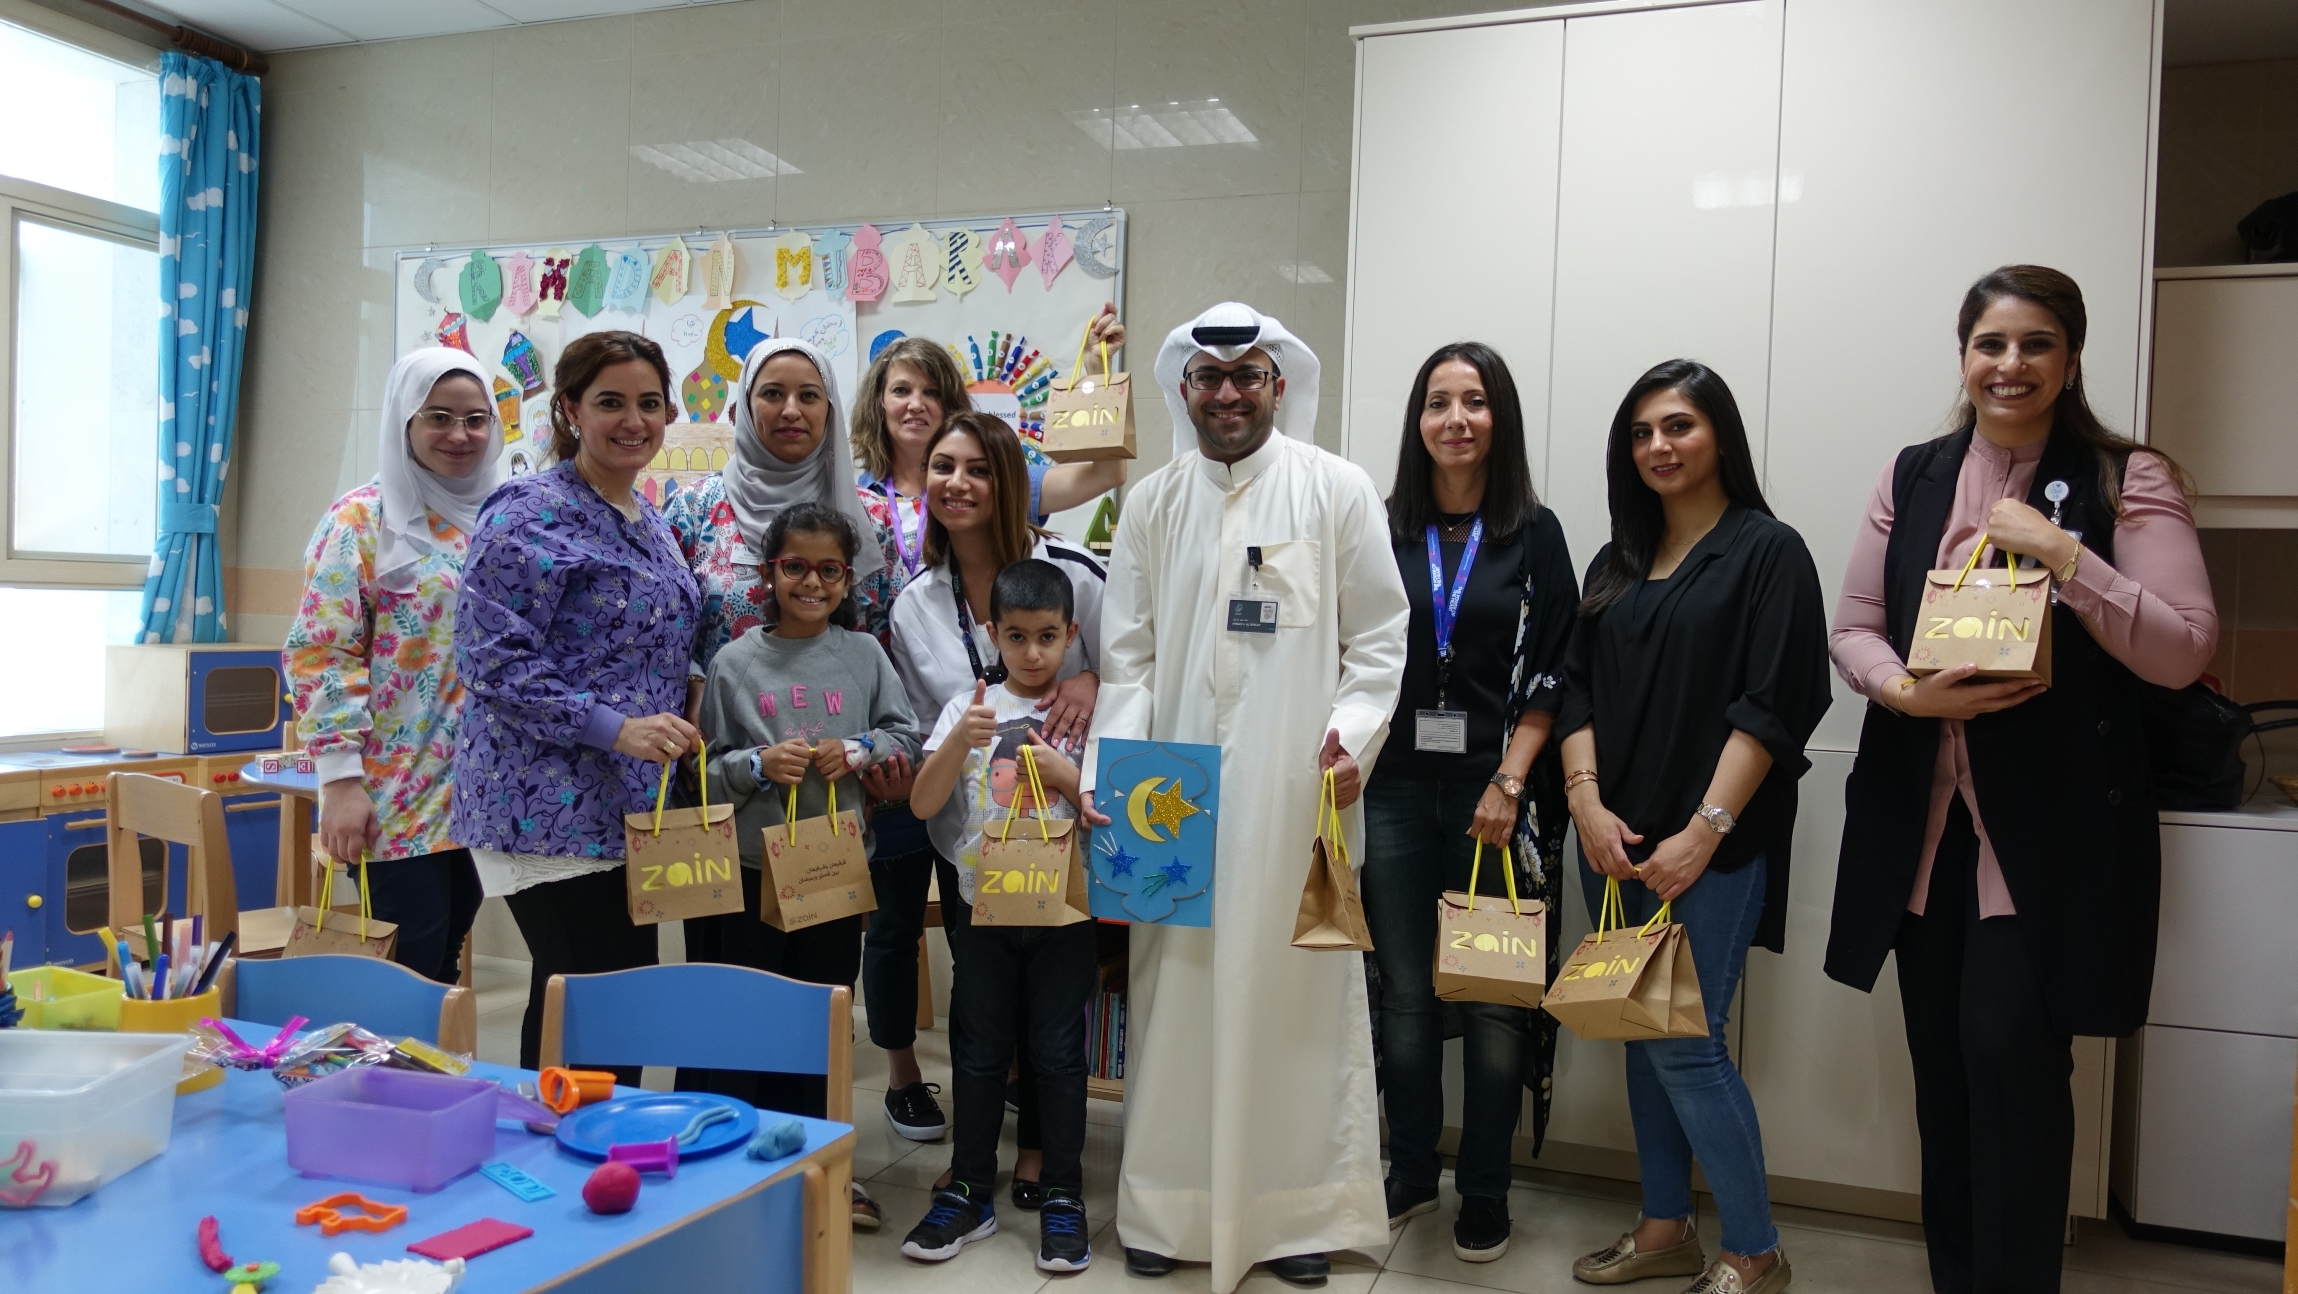 Zain shares the joys of the Holy Month with children in hospitals